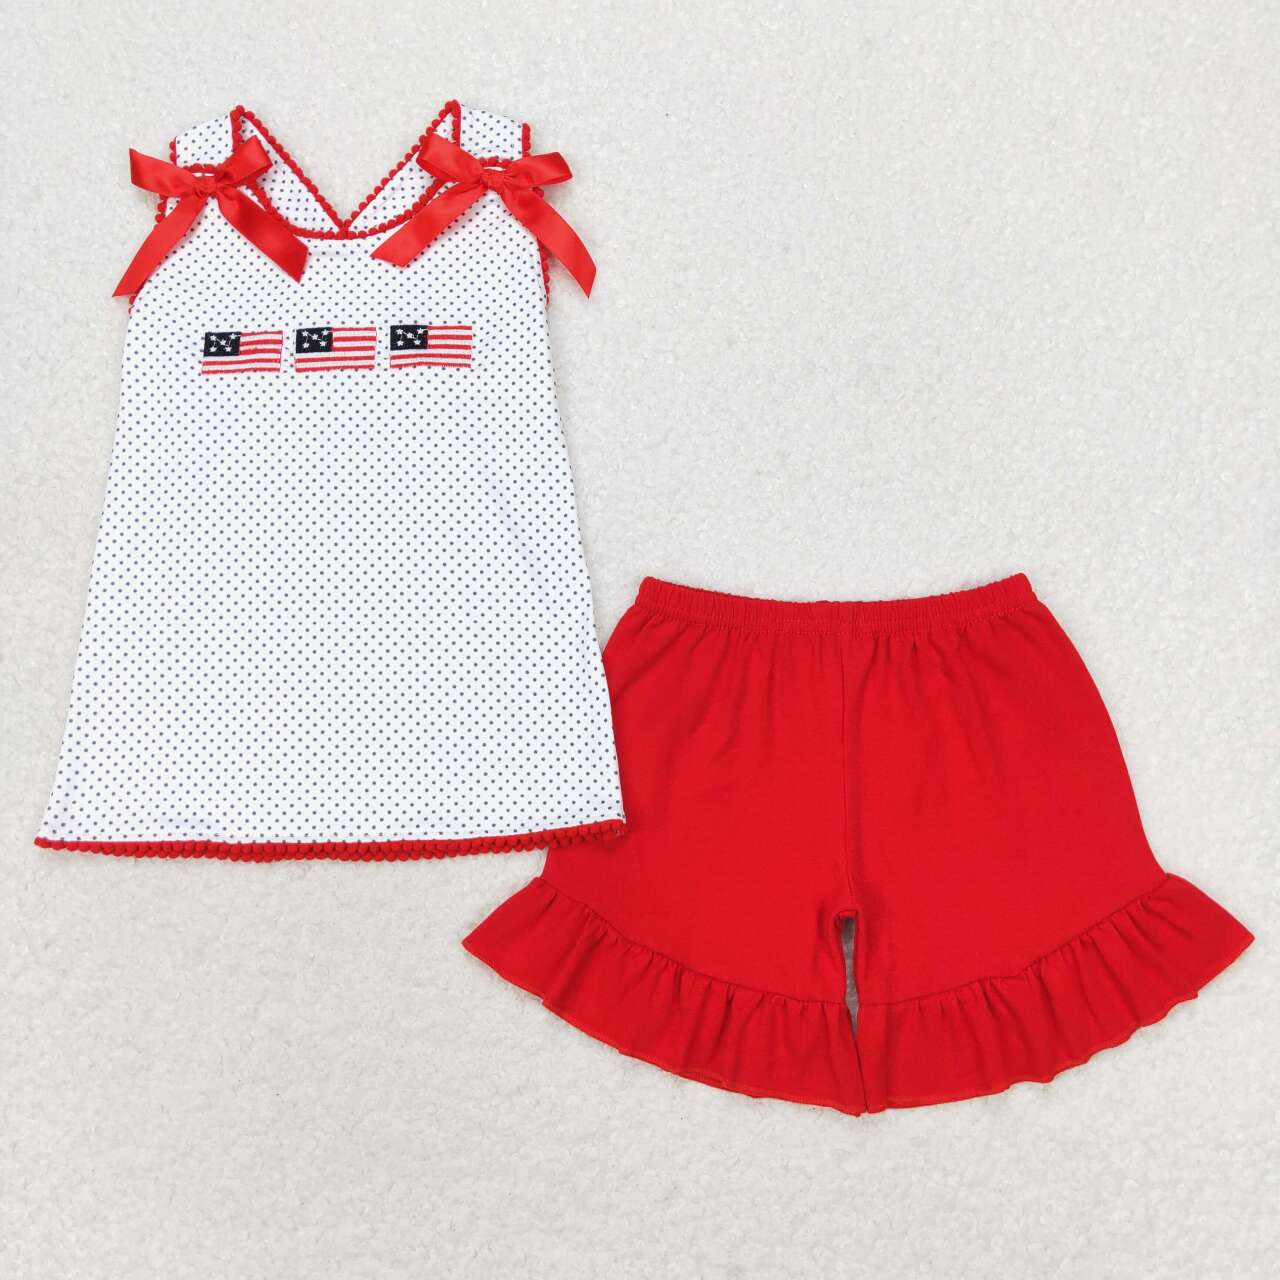 GSSO1414 Flags Embroidery Top Red Shorts Girls 4th of July Clothes Set